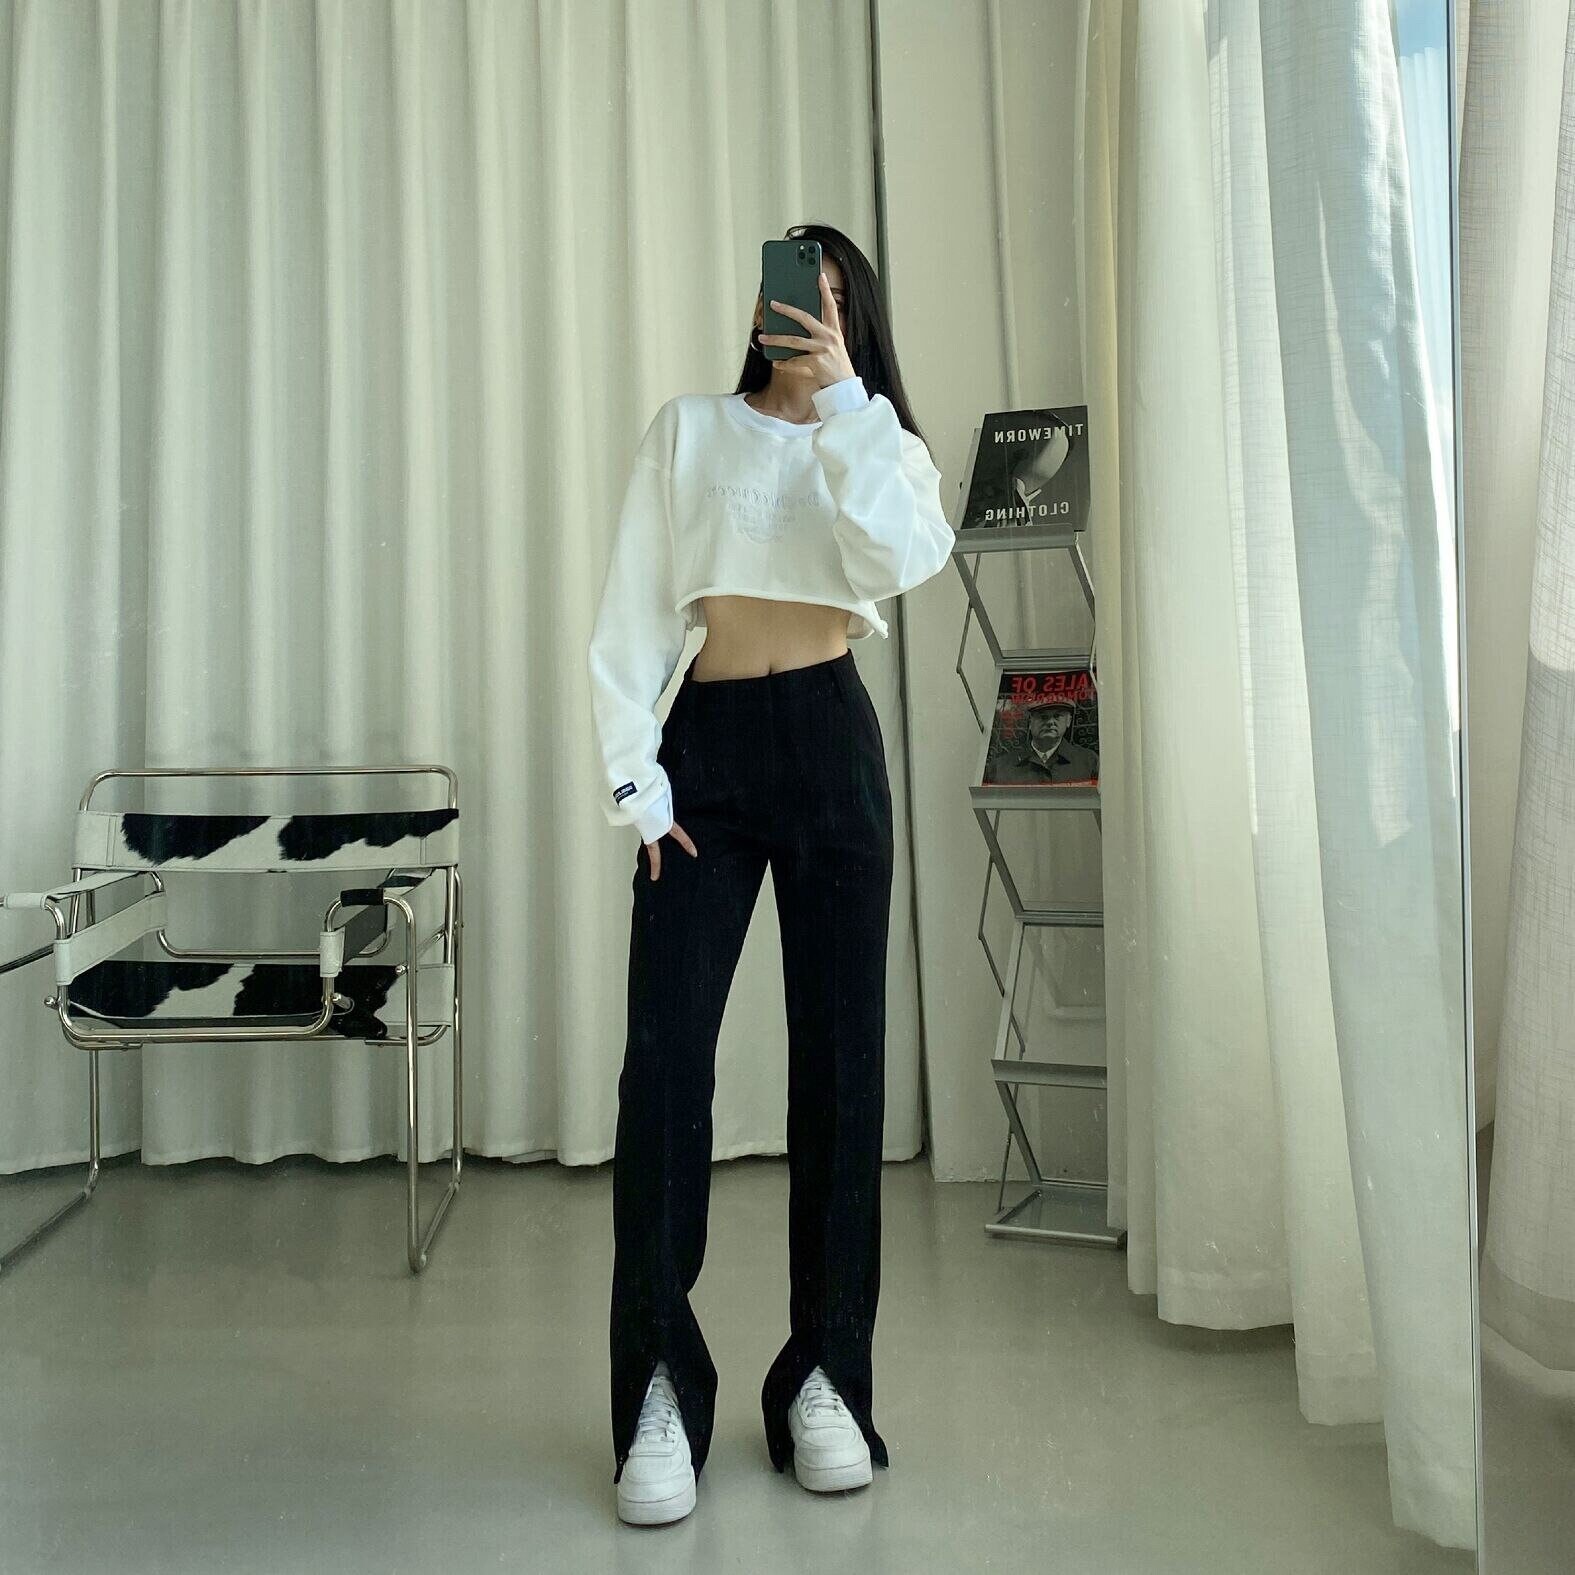 Women Office Slit Leg Black Flare Pants Lady Full Length Clothes Solid Straight Vintage Streetwear Work Spring